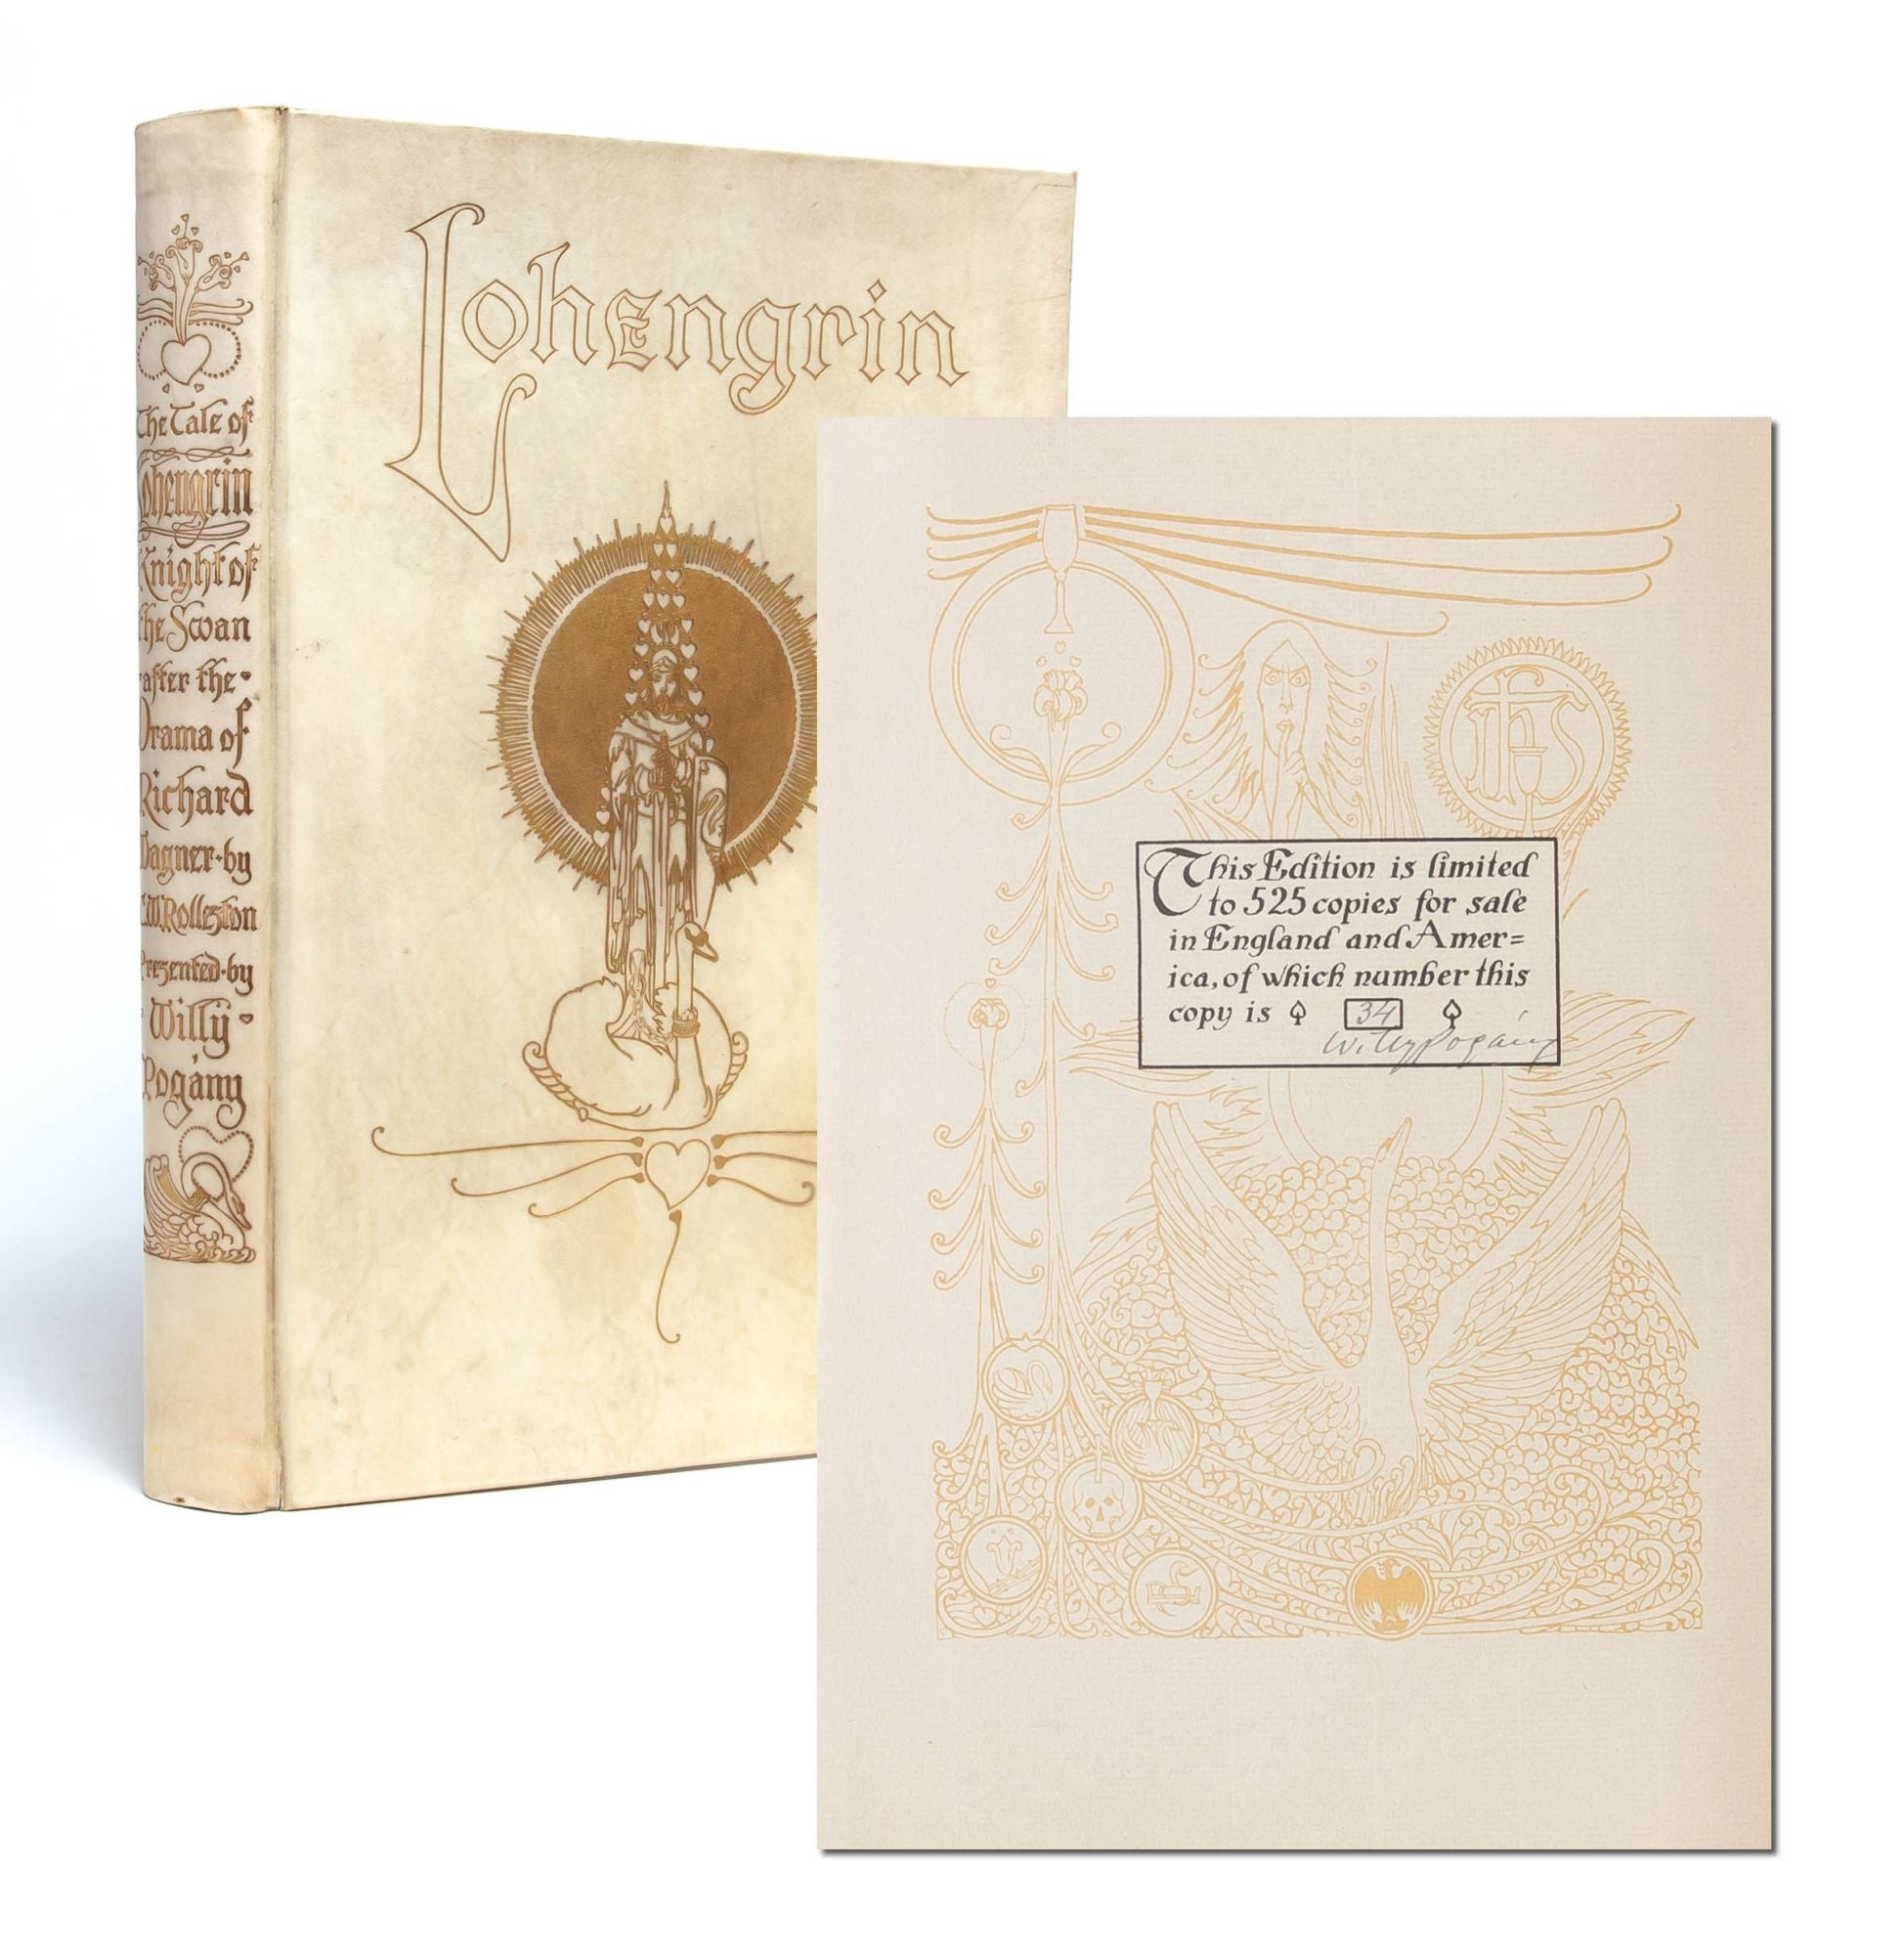 (Item #5692) The Tale of Lohengrin (Signed Limited Edition). Willy Pogany, Richard Wagner.